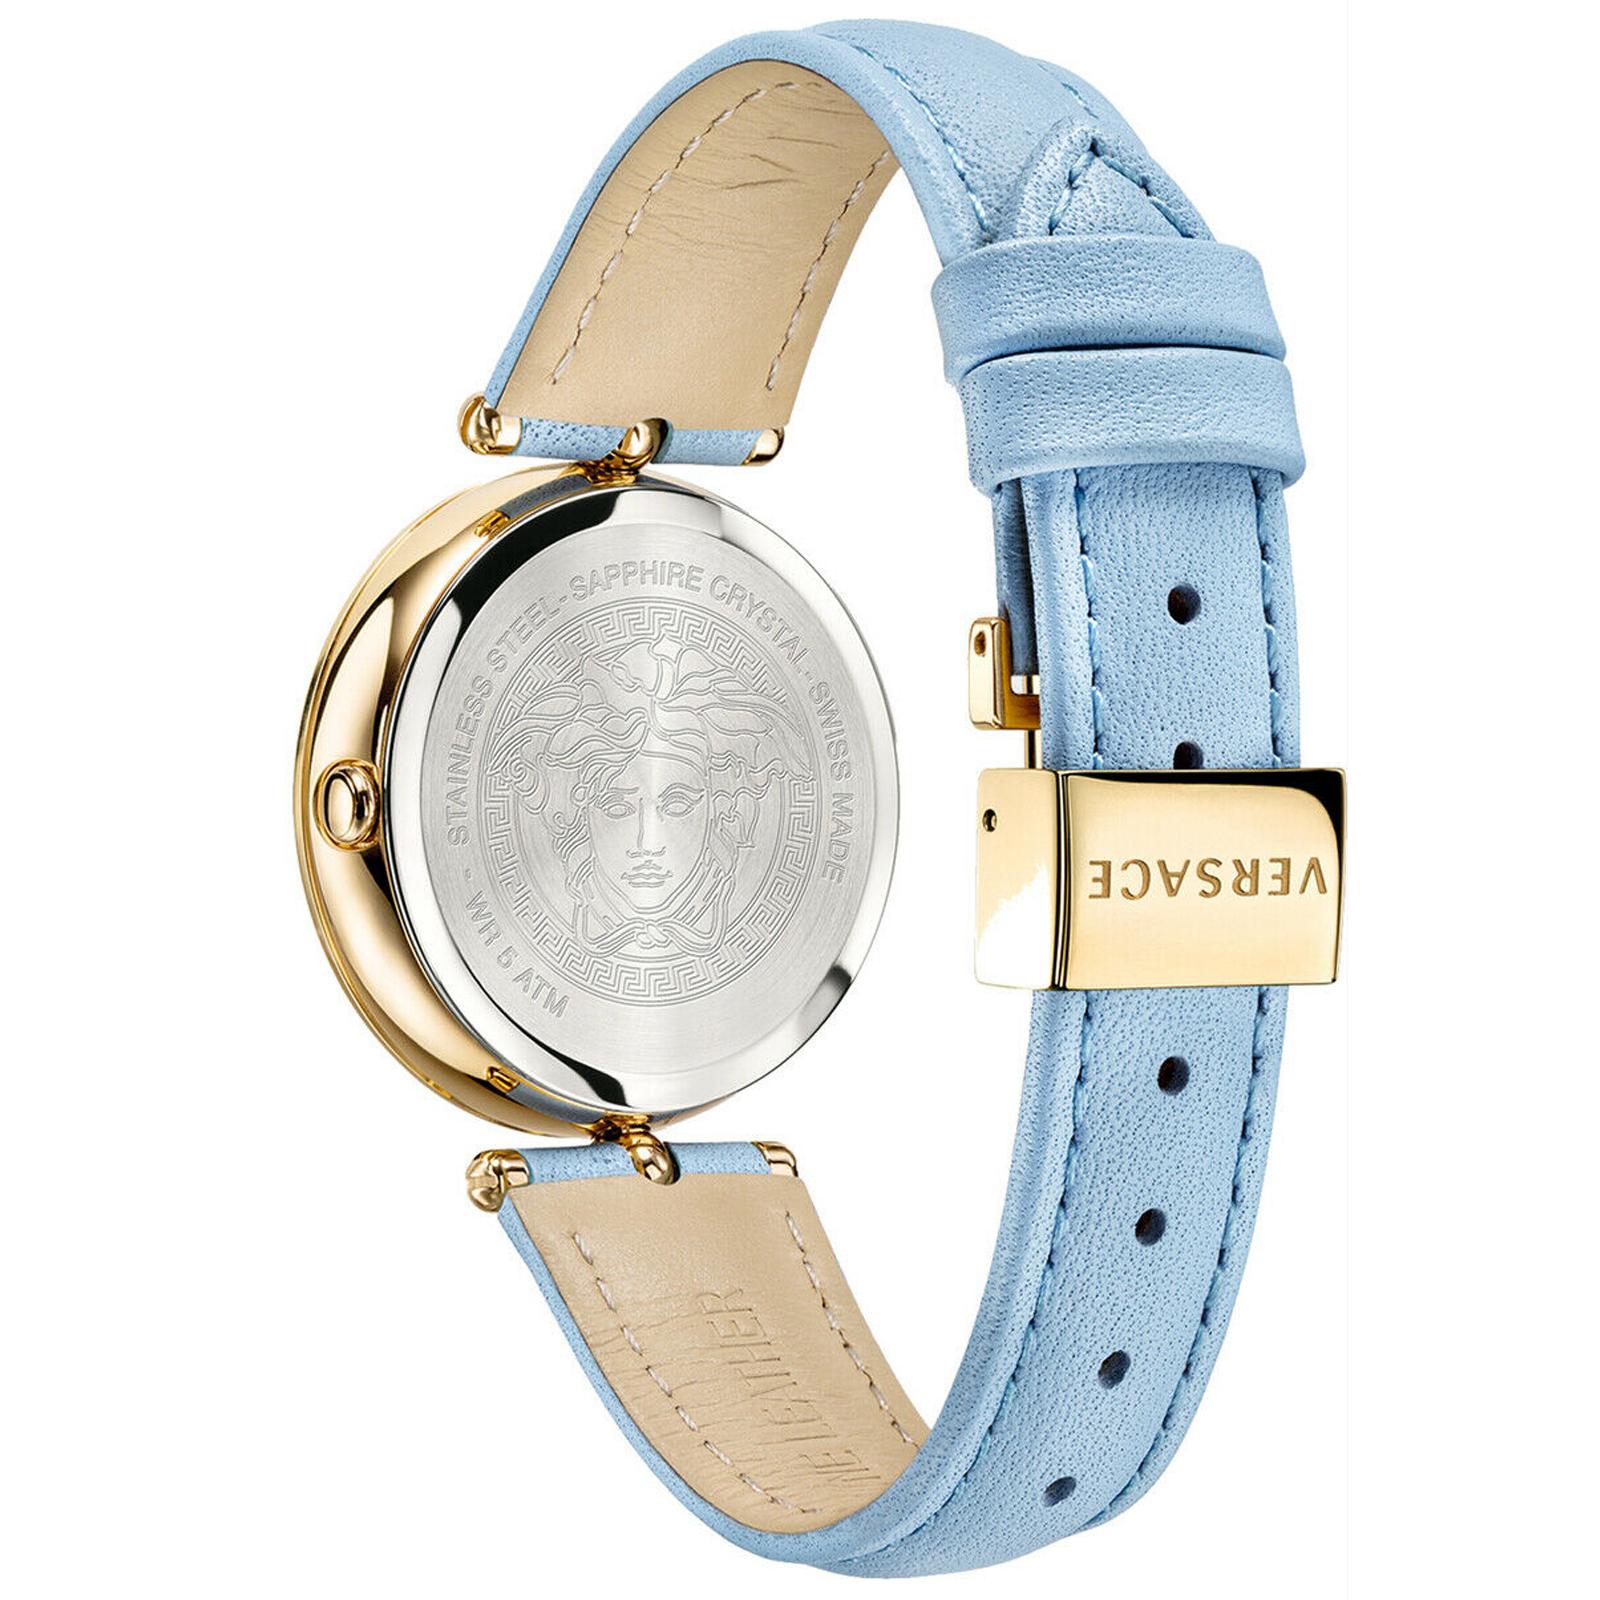 new VERSACE 39mm Palazzo Medusa gold plated Greca bezel blue strap ladies watch
Brand: Versace
Designer: Donatella Versace
Collection: Spring Summer 2018
Model Name / Style: Palazzo Empire watch
Material: Metal, leather
Color: Blue
Pattern: